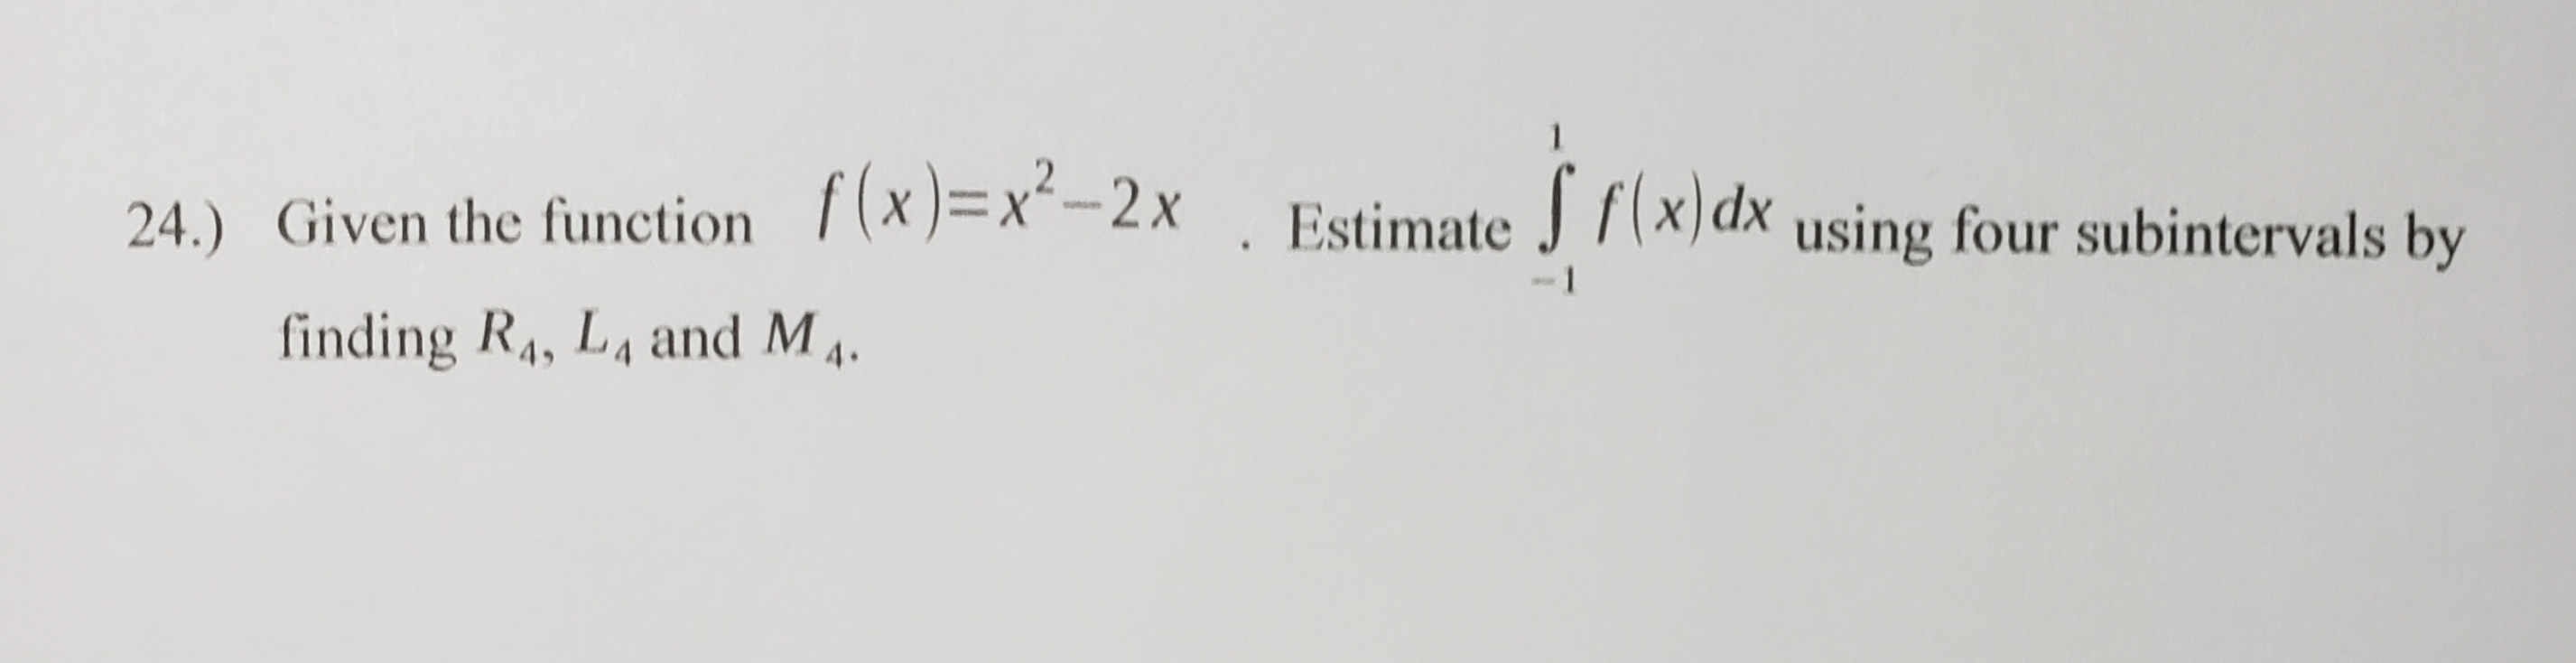 24.) Given the function f(x)=x²– 2x
Estimate J f(x) dx using four subintervals by
.
finding R4, L4 and M4.
